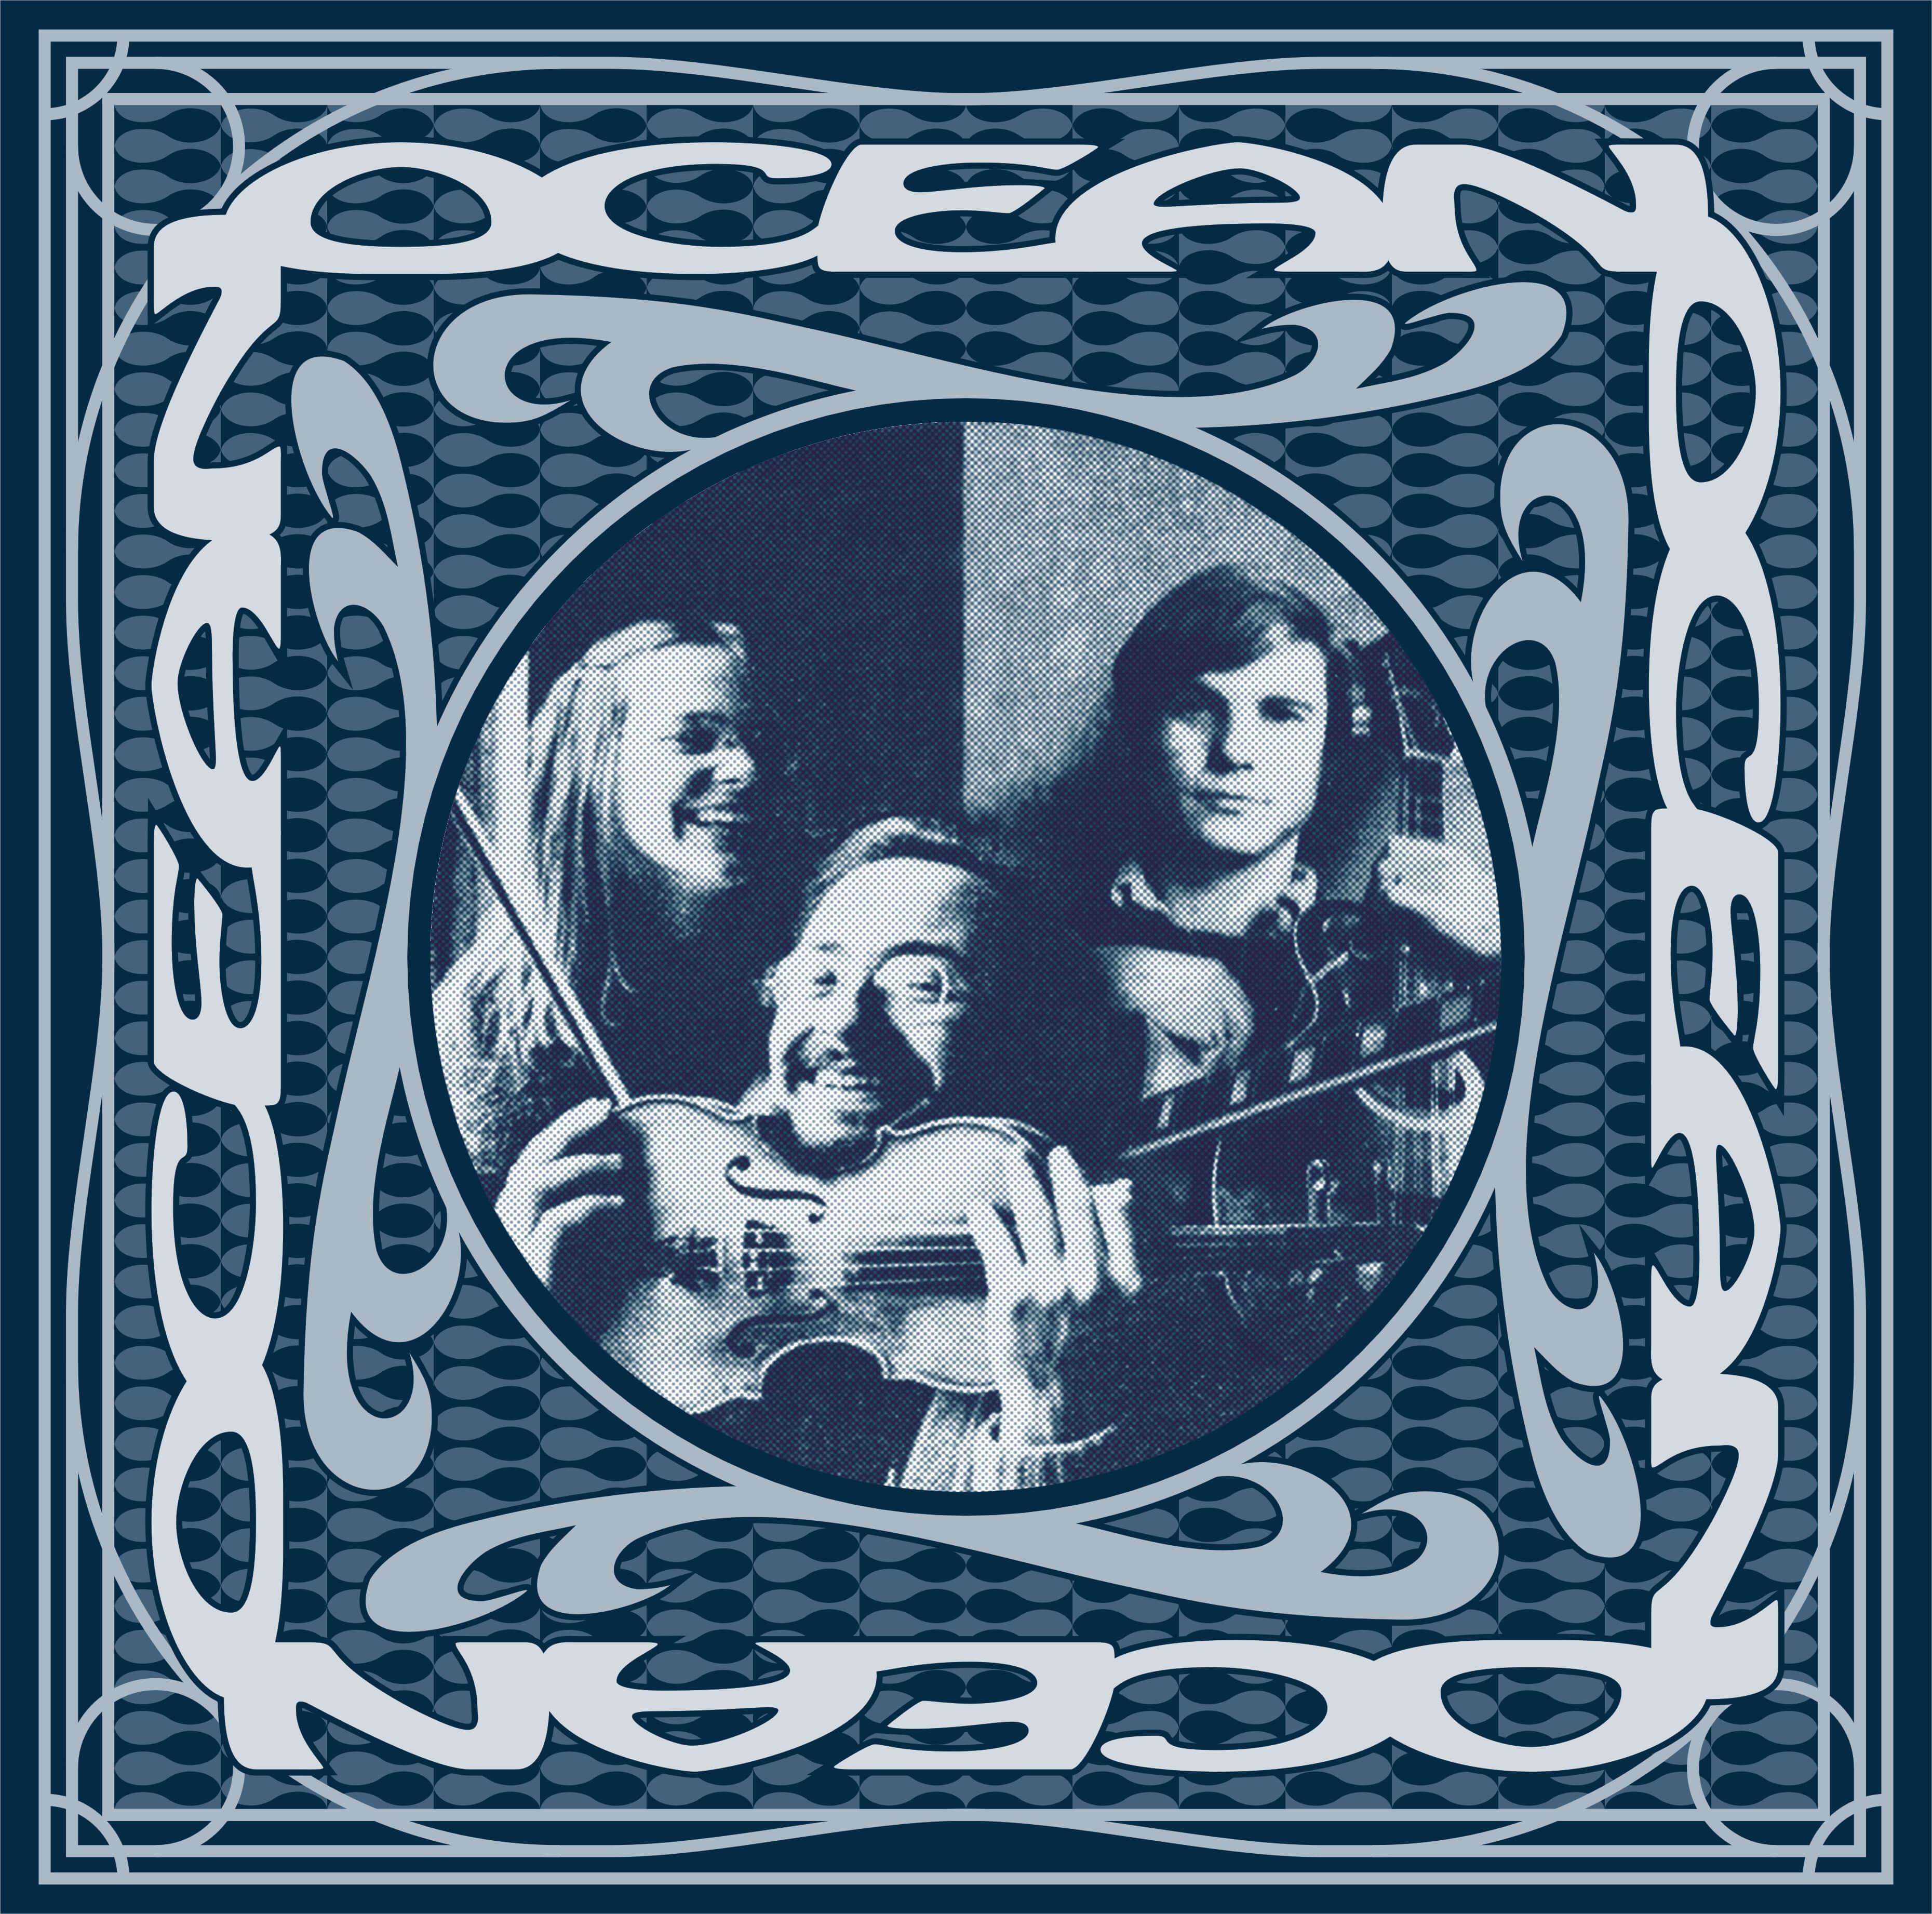 OCEAN - a lost 60's folk-rock gem on vinyl for the first time...